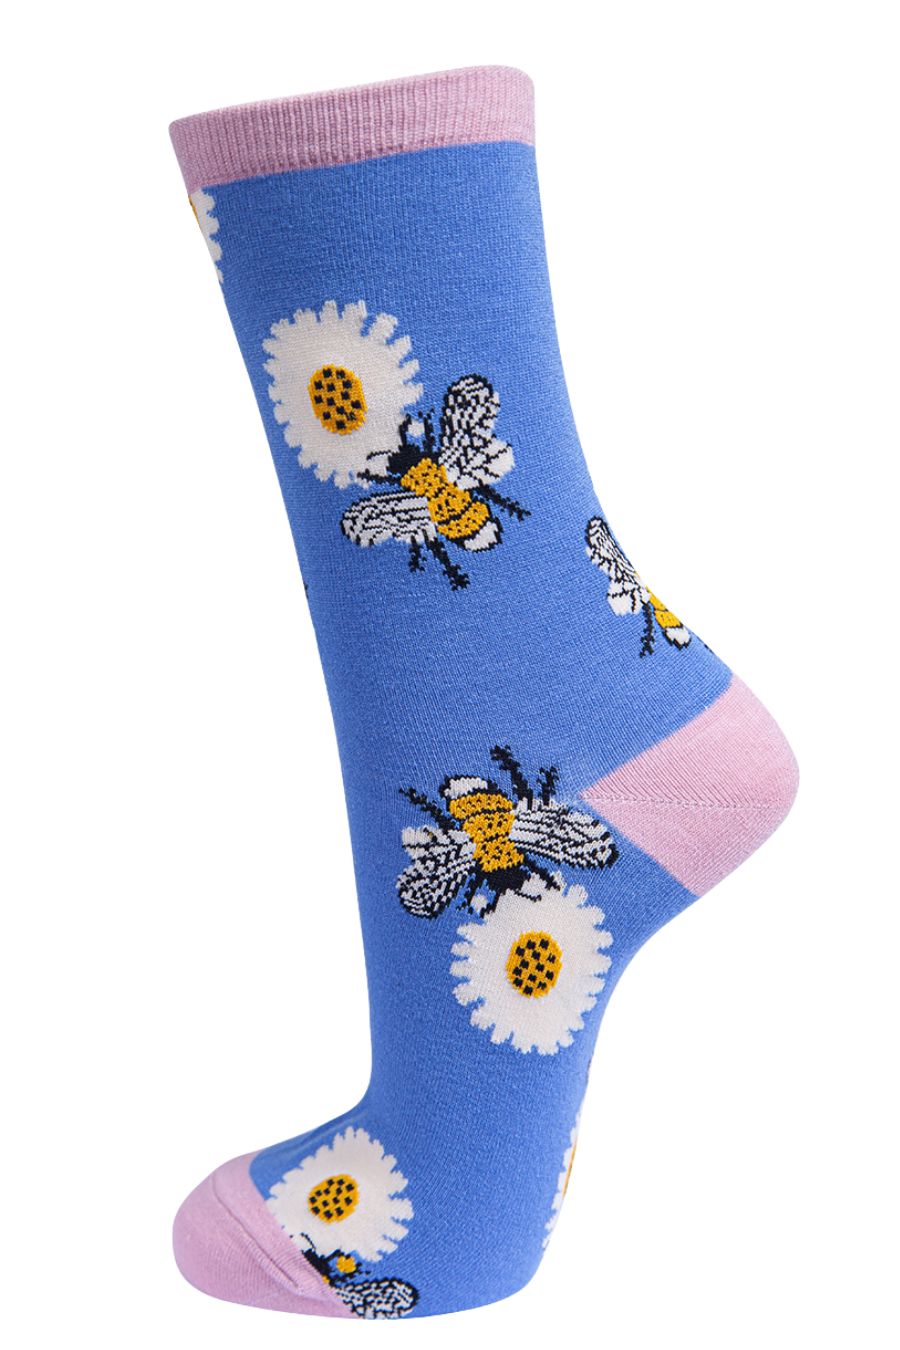 lilac, pink bamboo socks with yellow bees and white daisy flowers